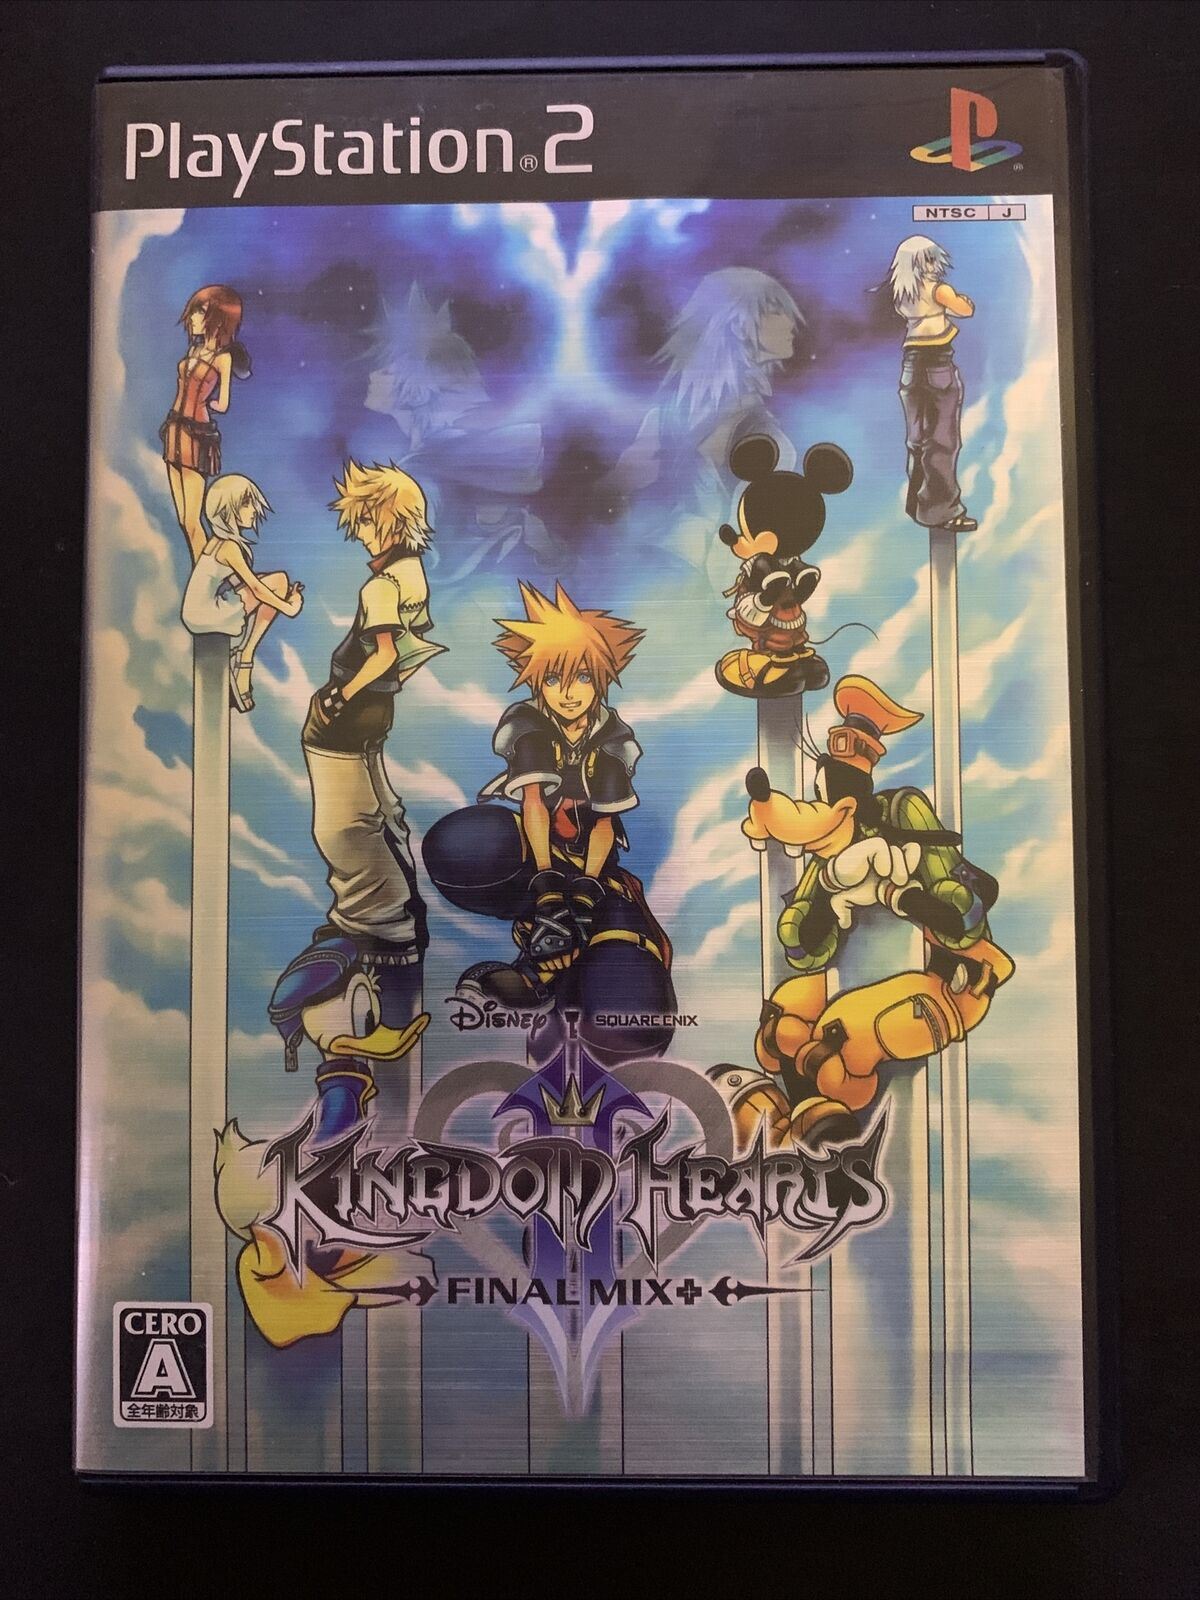 Kingdom Hearts II: Final Mix PS2 SLPM 66675 NTSC-J — Complete Art Scans :  Square Enix : Free Download, Borrow, and Streaming : Internet Archive